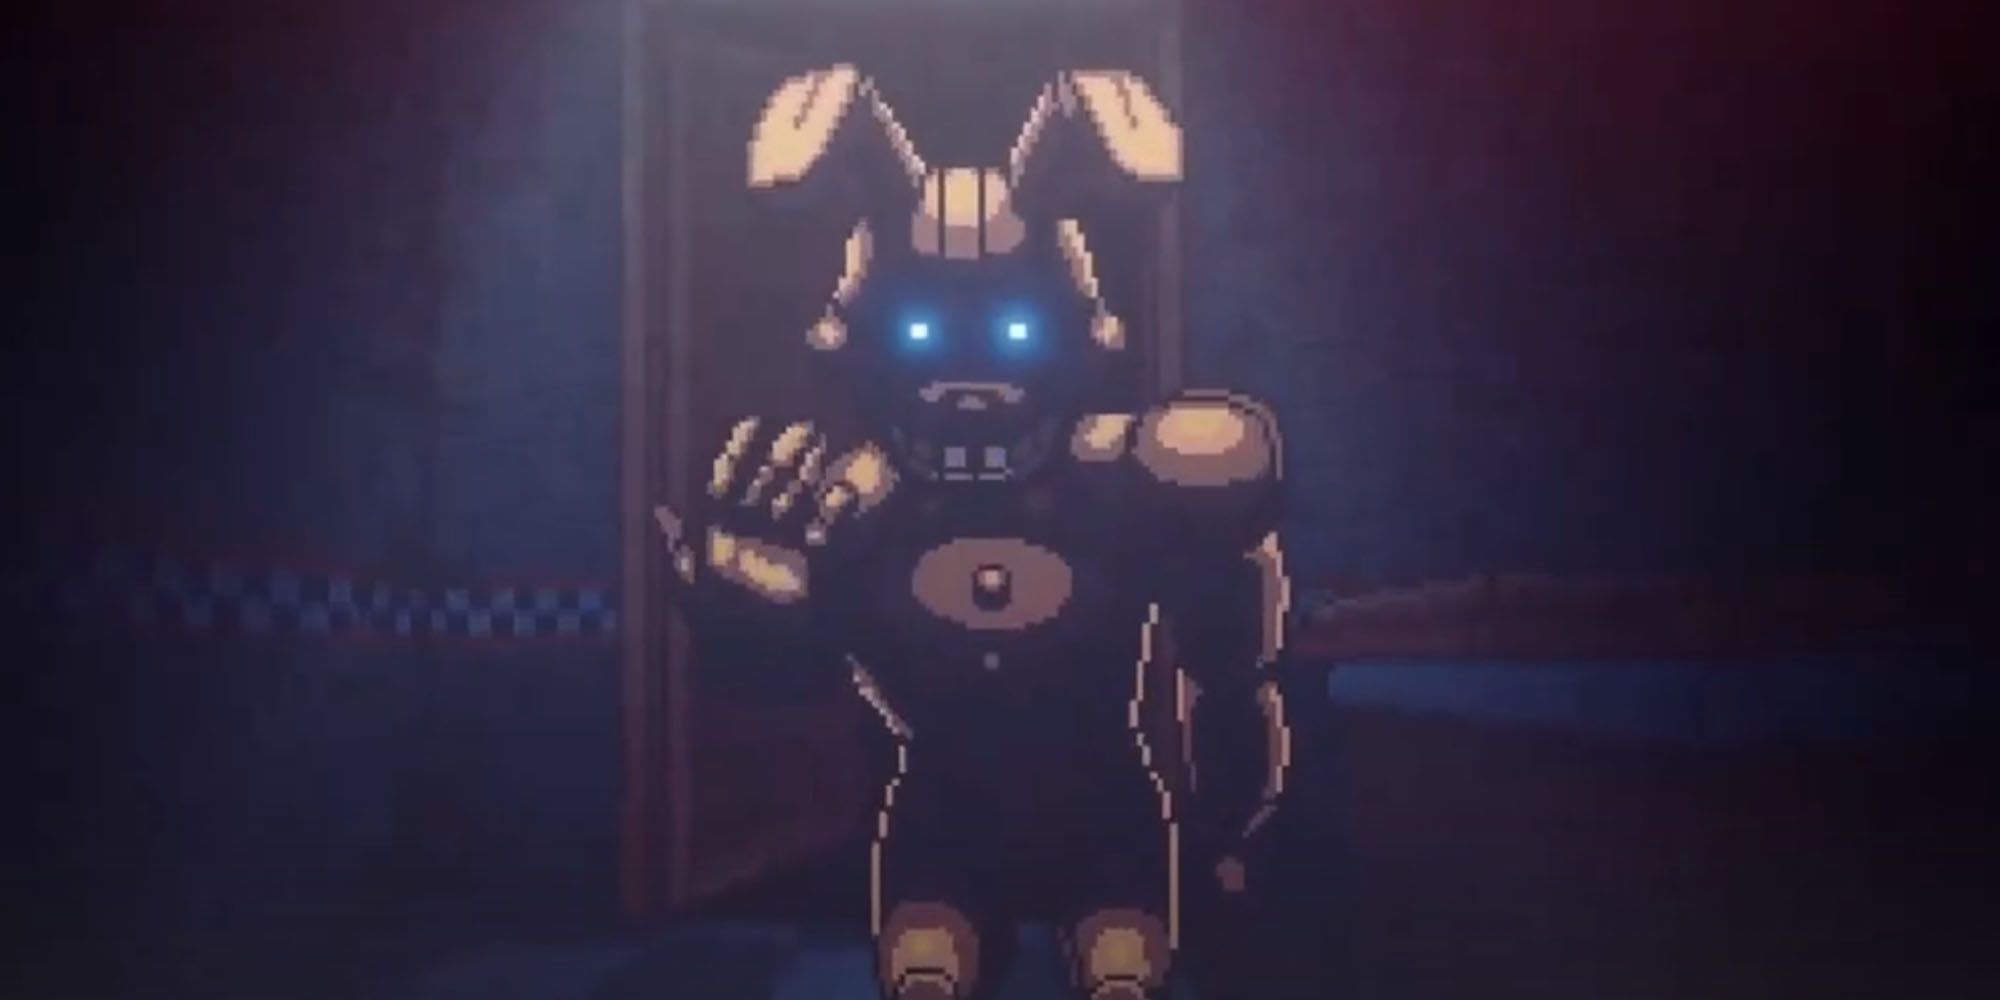 Five Nights at Freddys Springbonnie from spin-off, 2D and pixelated gesturing for us to follow them through a dark door in the pizzeria